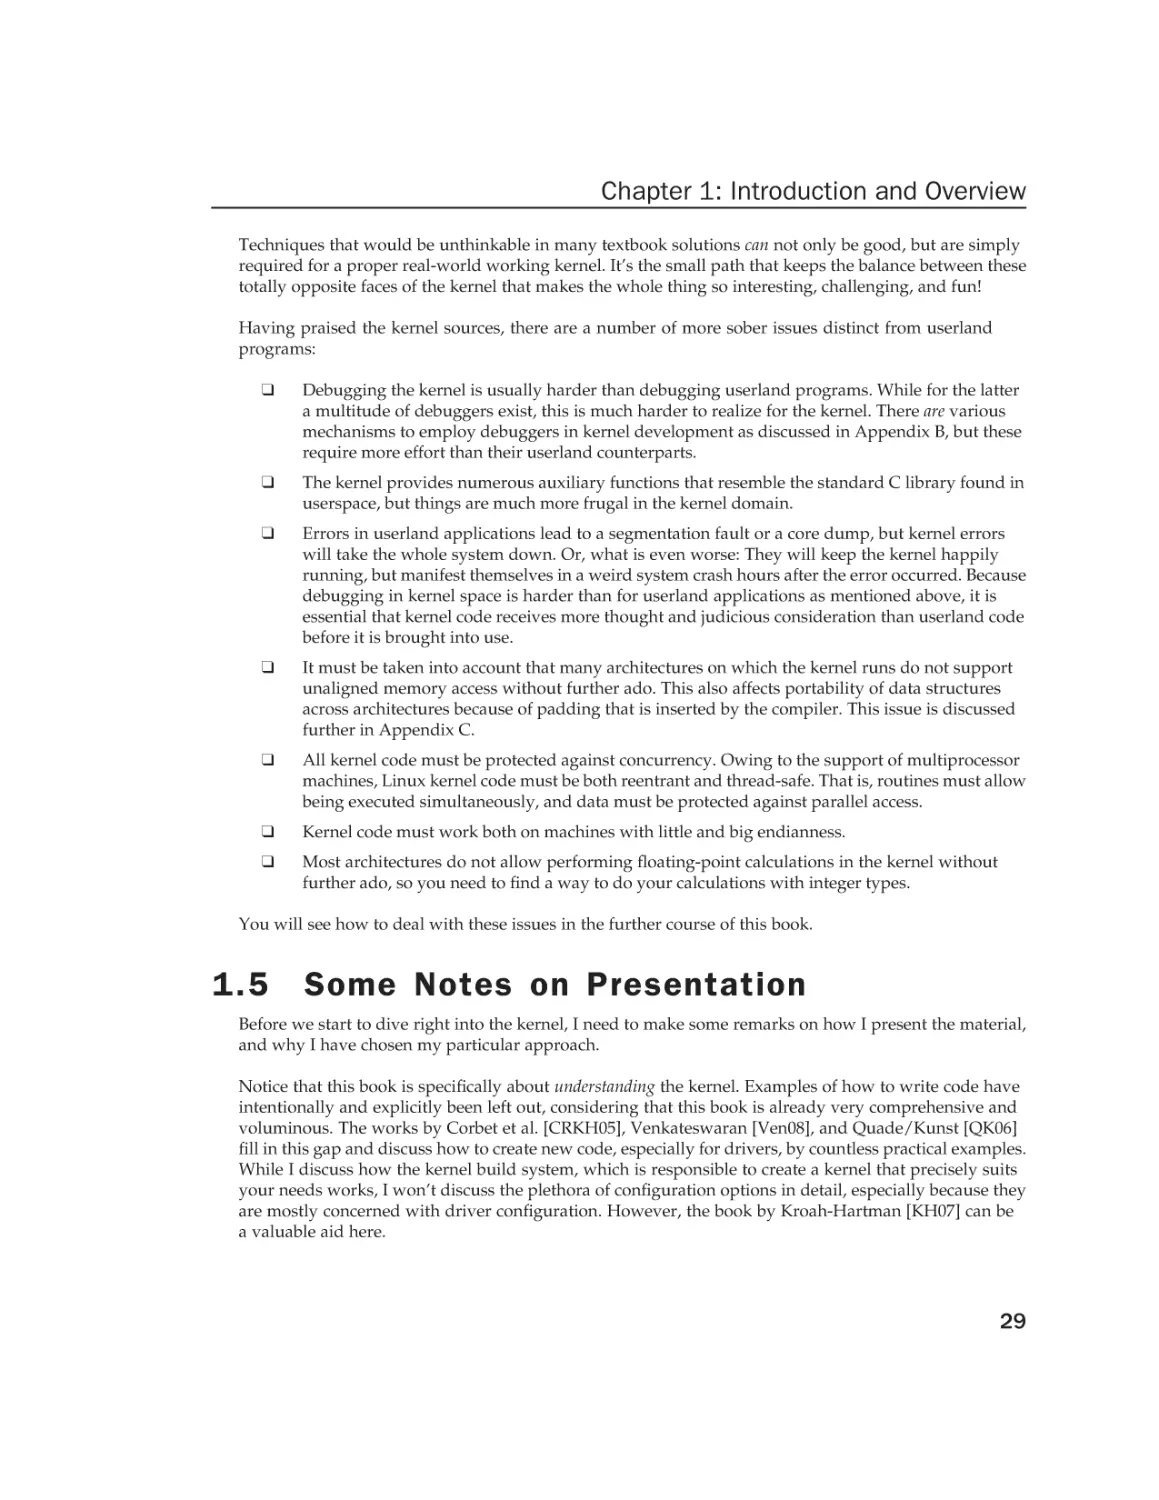 1.5 Some Notes on Presentation